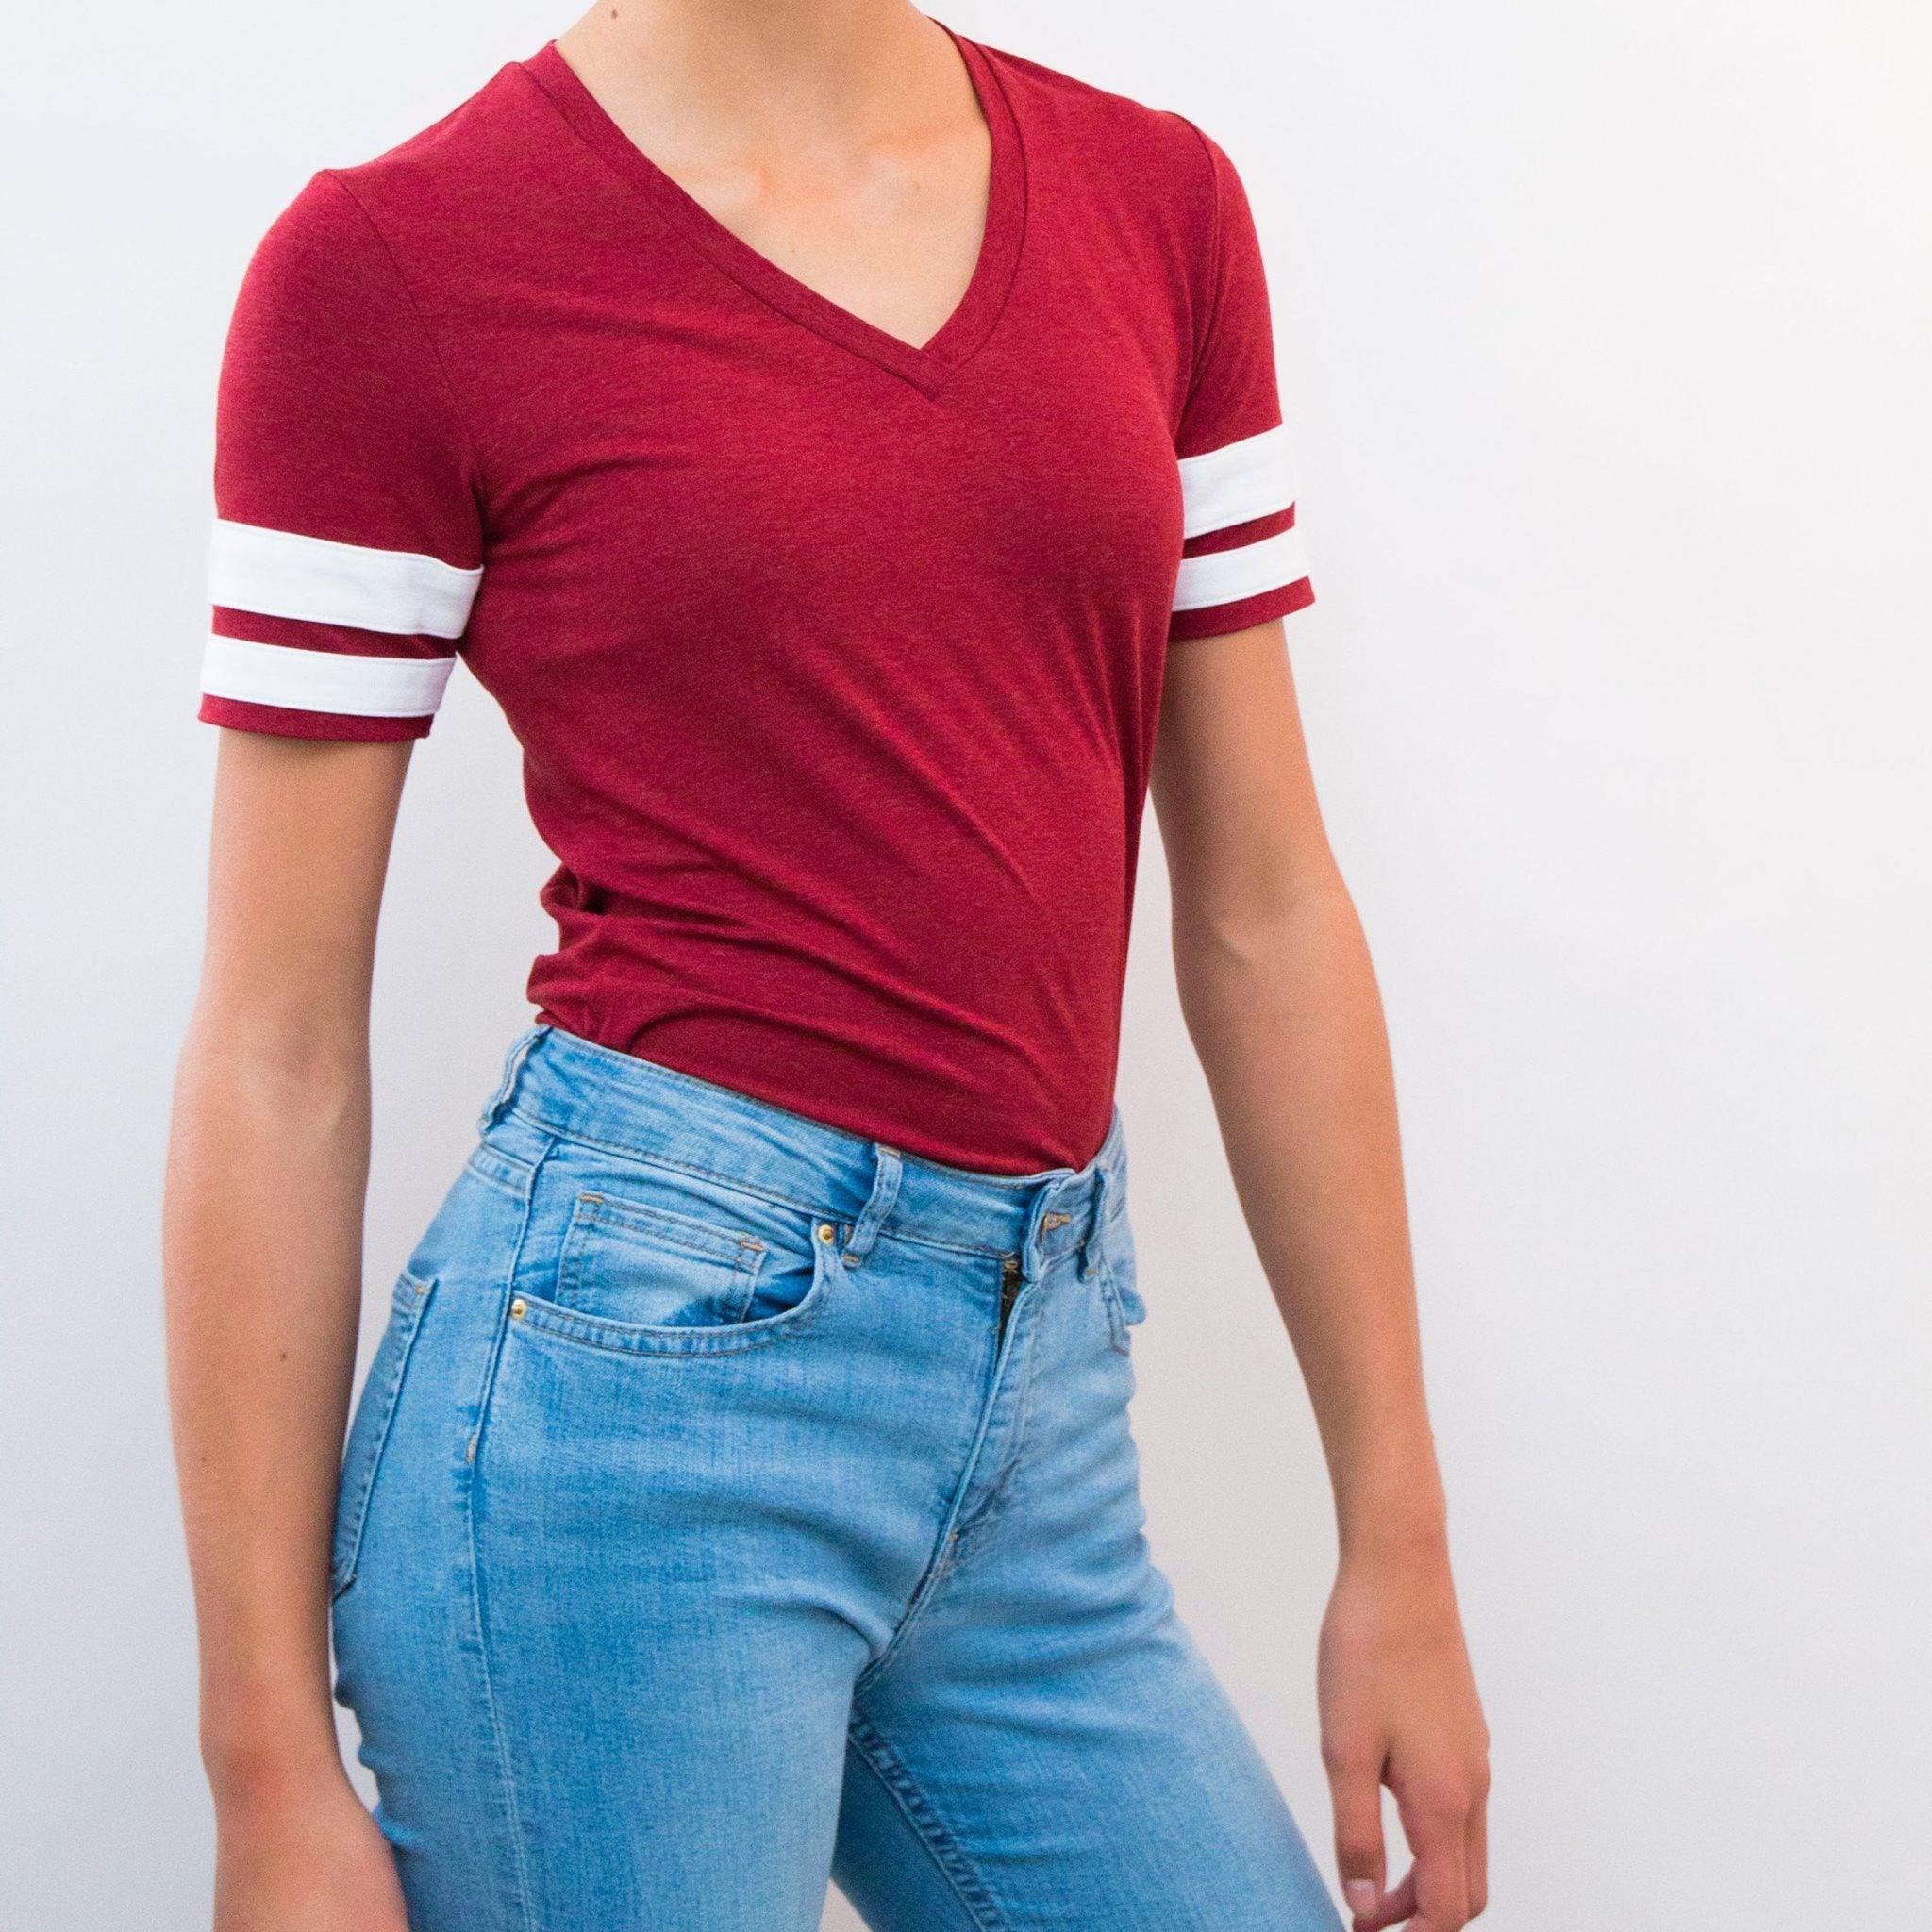 Red V-neck version of t-shirt pattern 2805, with added stripes on the sleeves